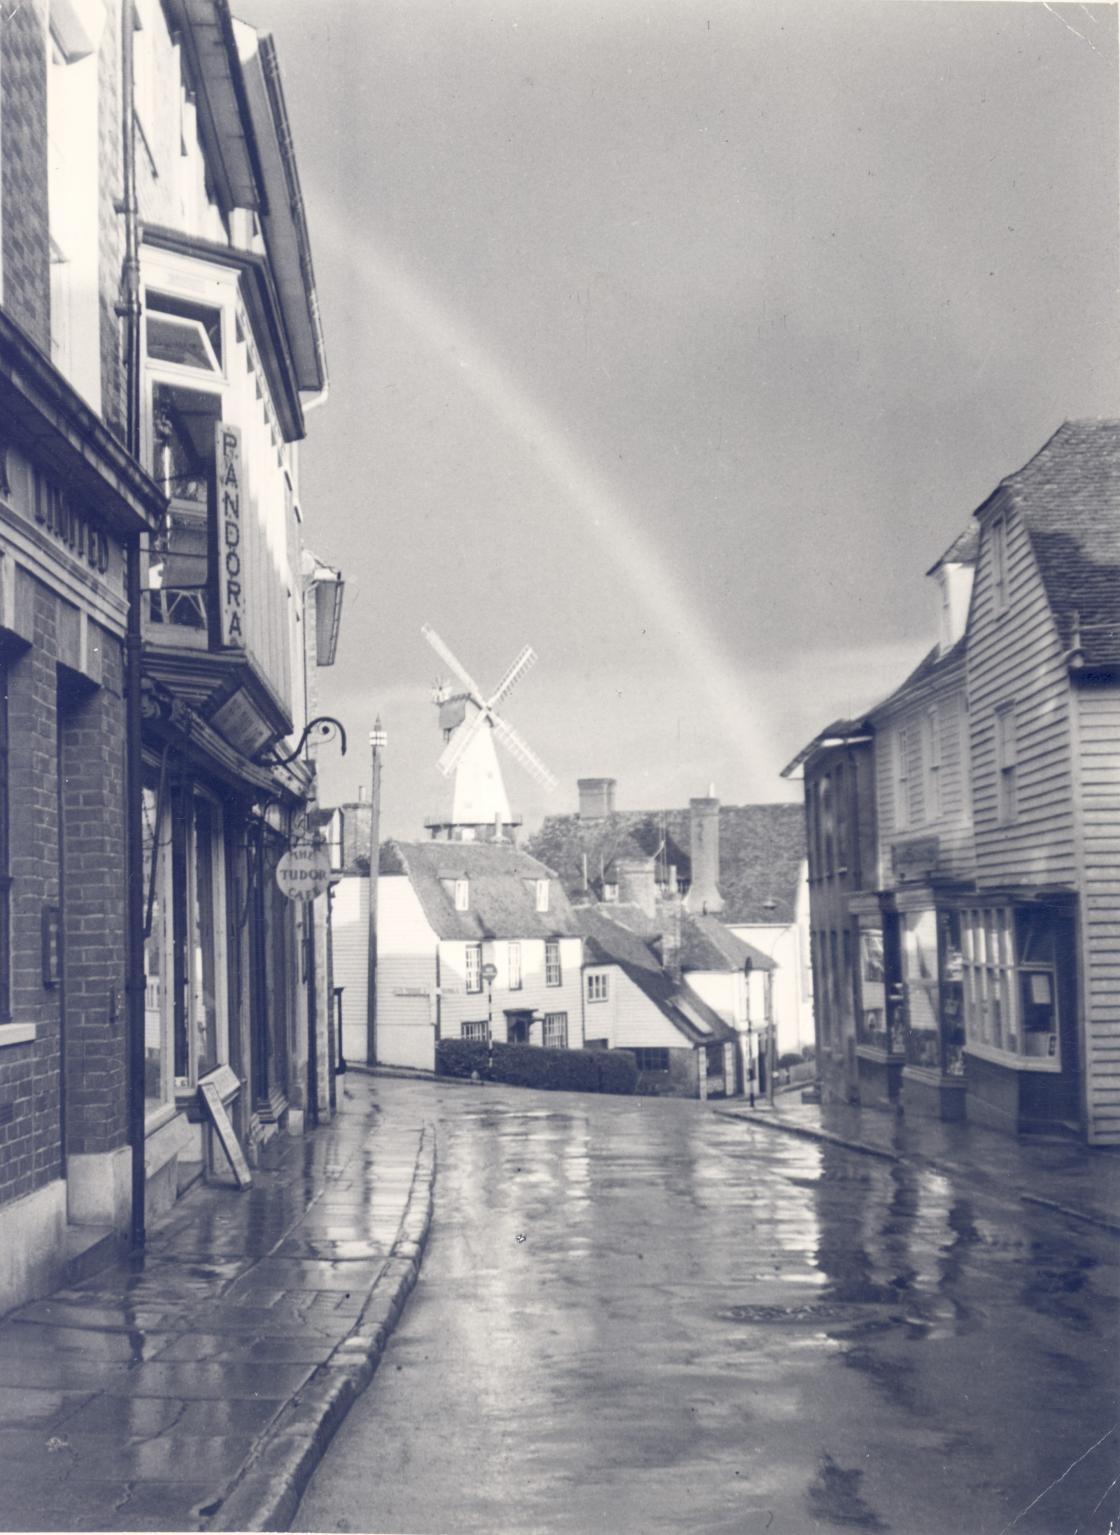 Historic photograph of a street in Cranbrook, UK